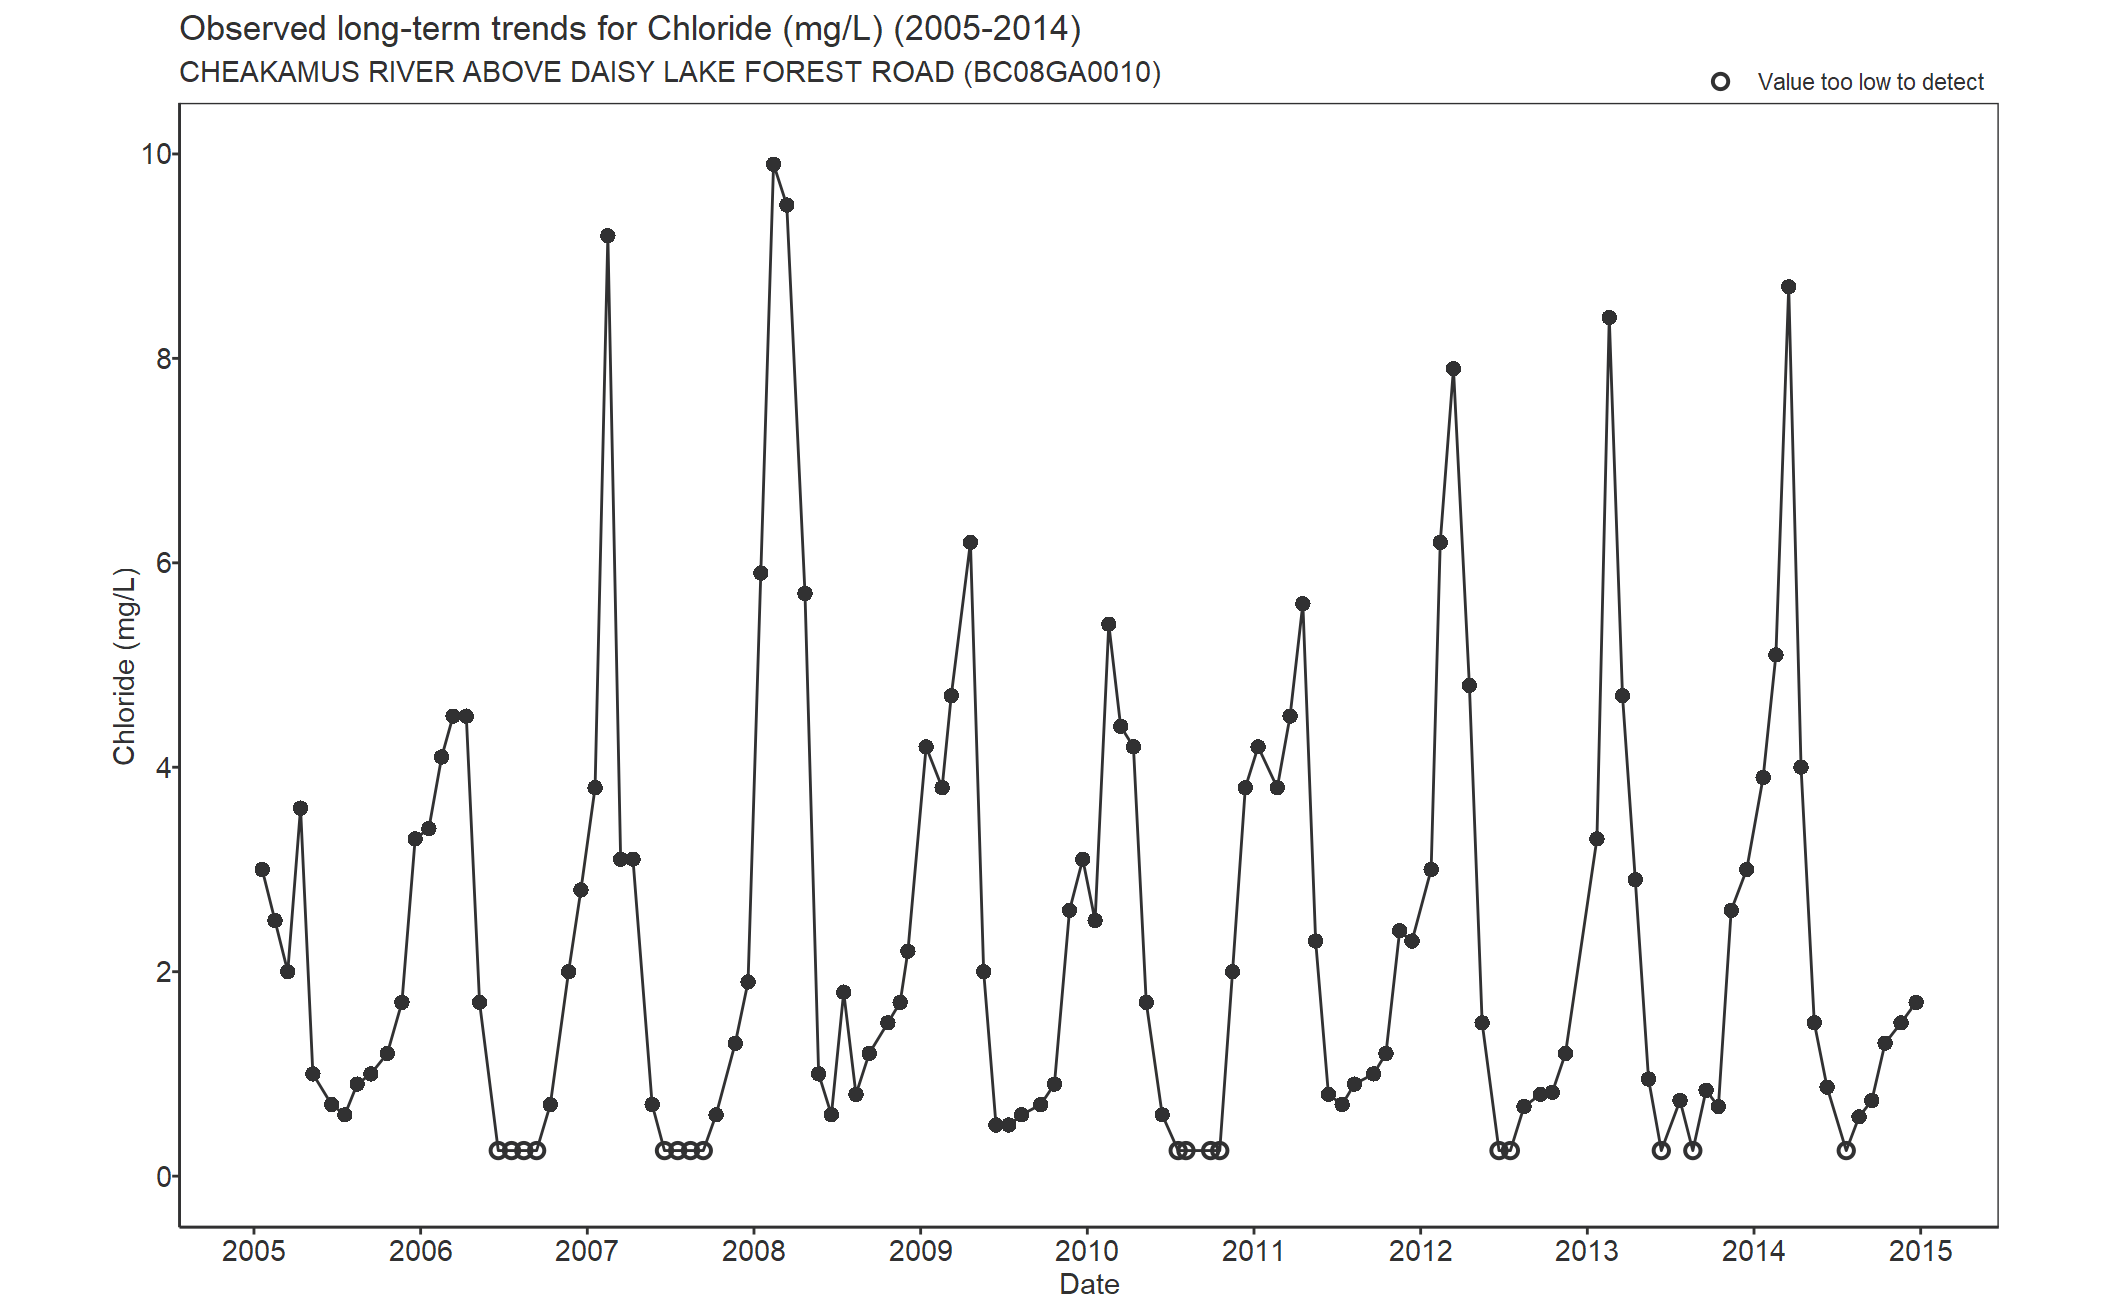 Observed long-term trends for Chloride (2005-2014)